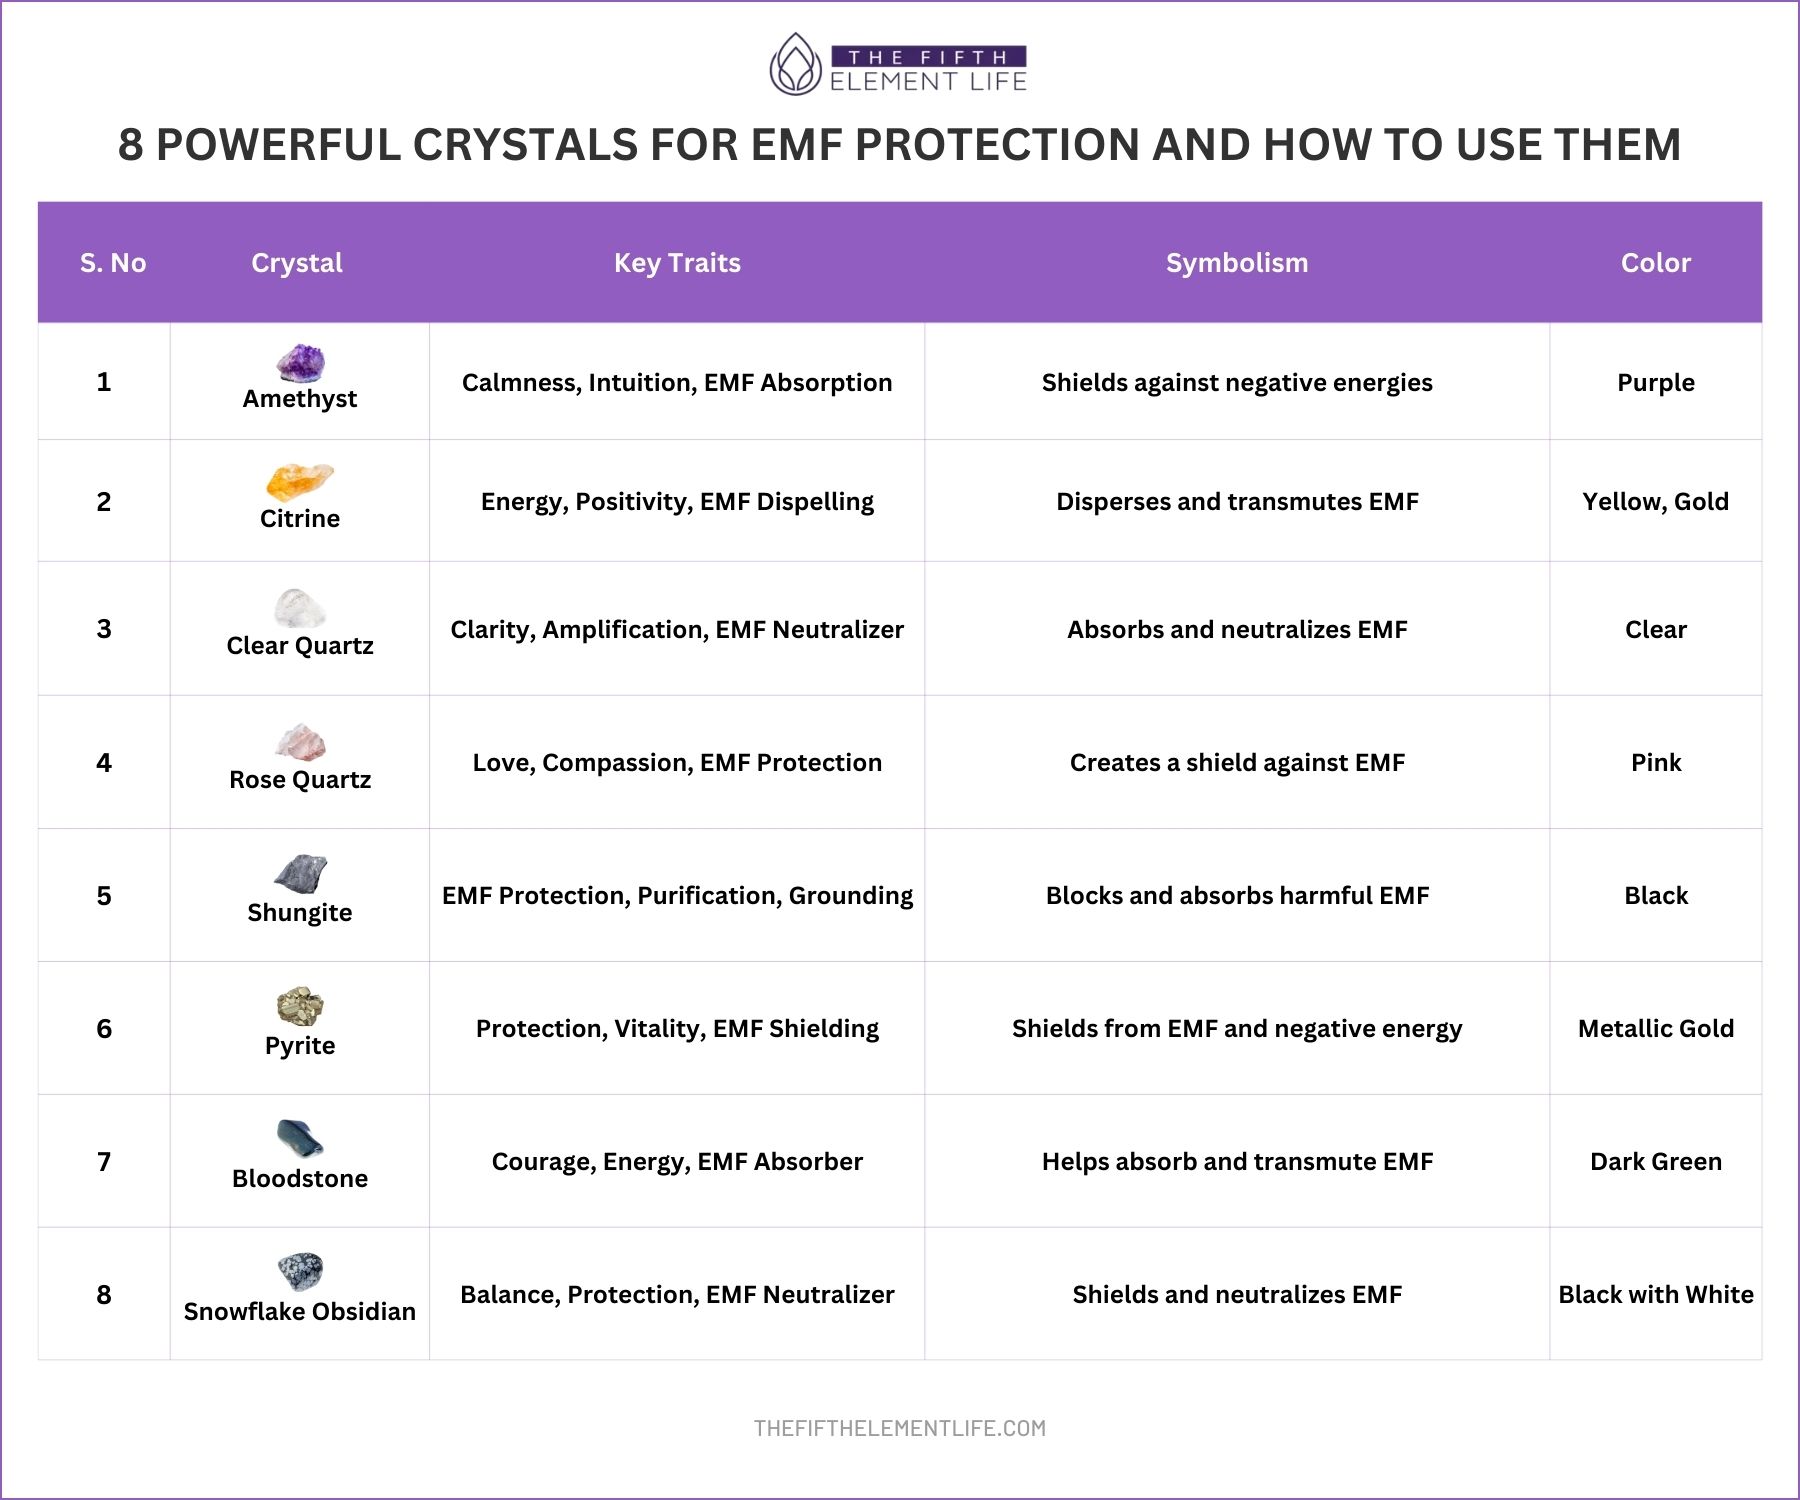 8 Powerful Crystals For EMF Protection And How To Use Them